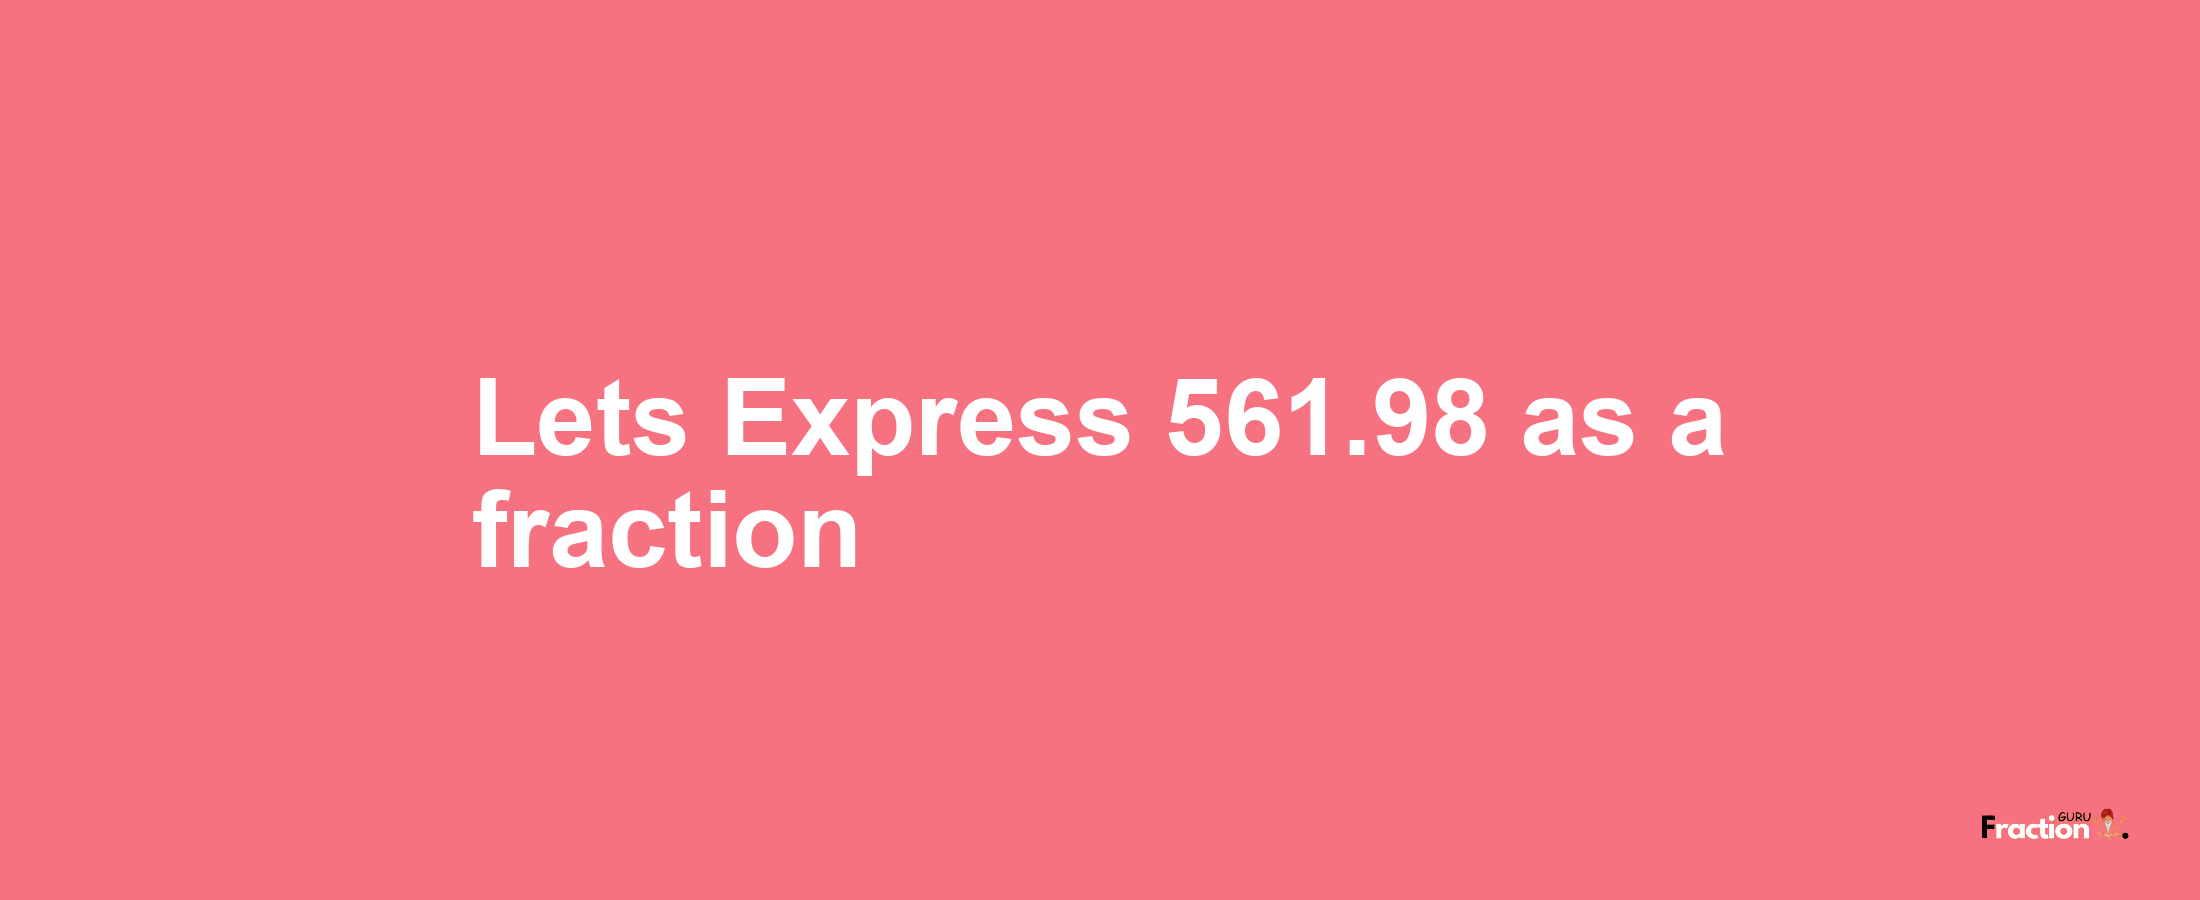 Lets Express 561.98 as afraction